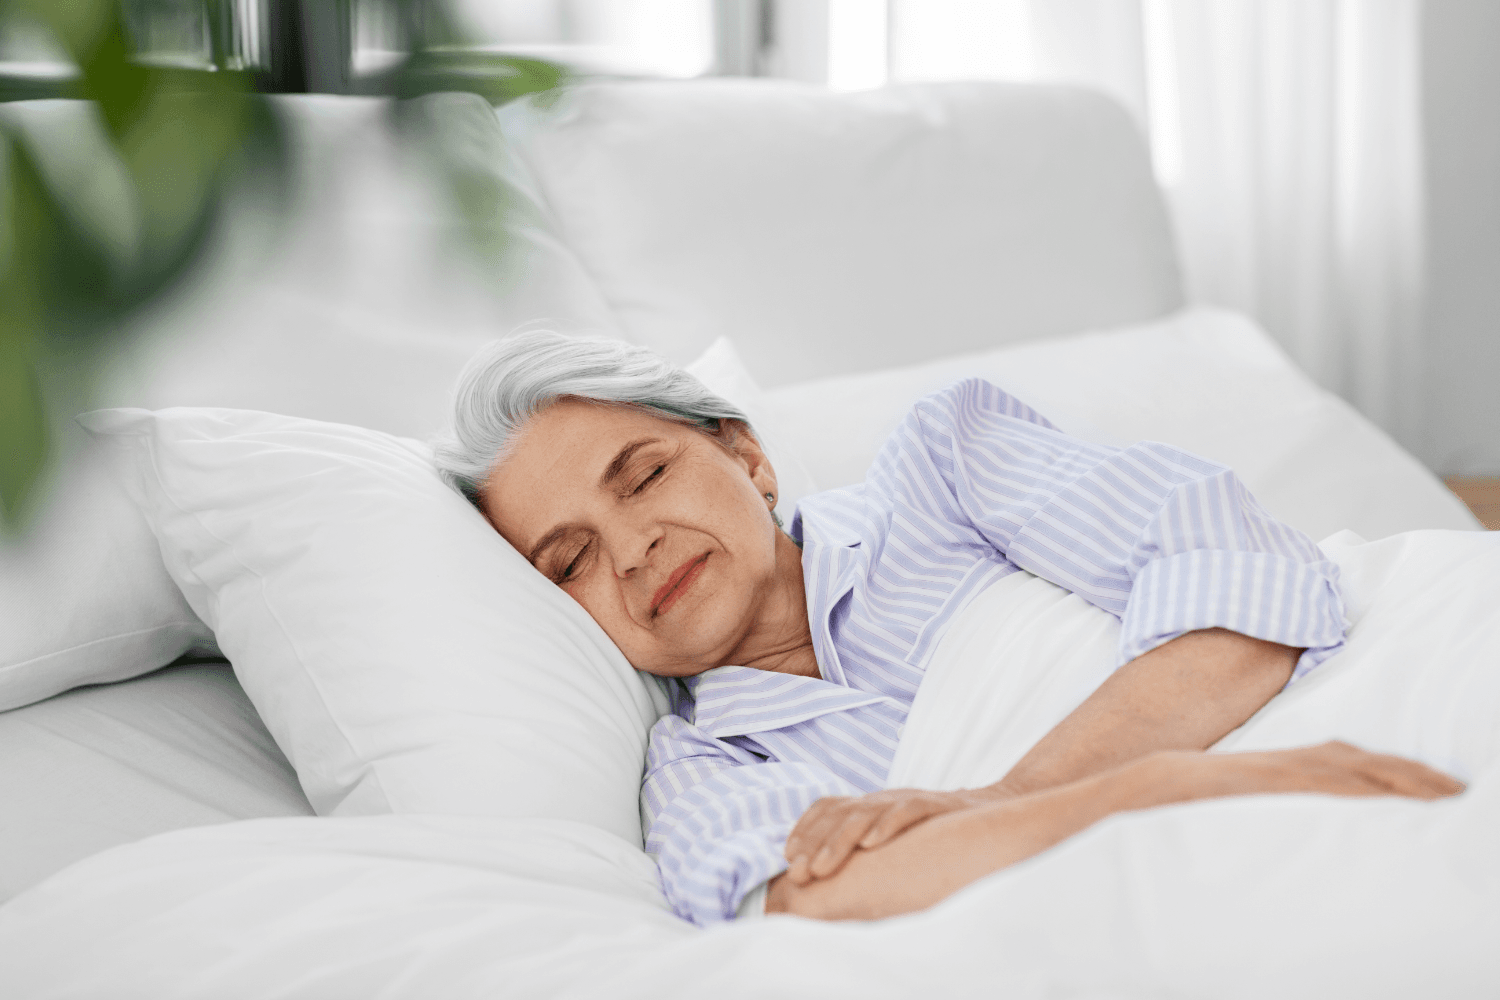 Woman sleeping in a bed with white bedding